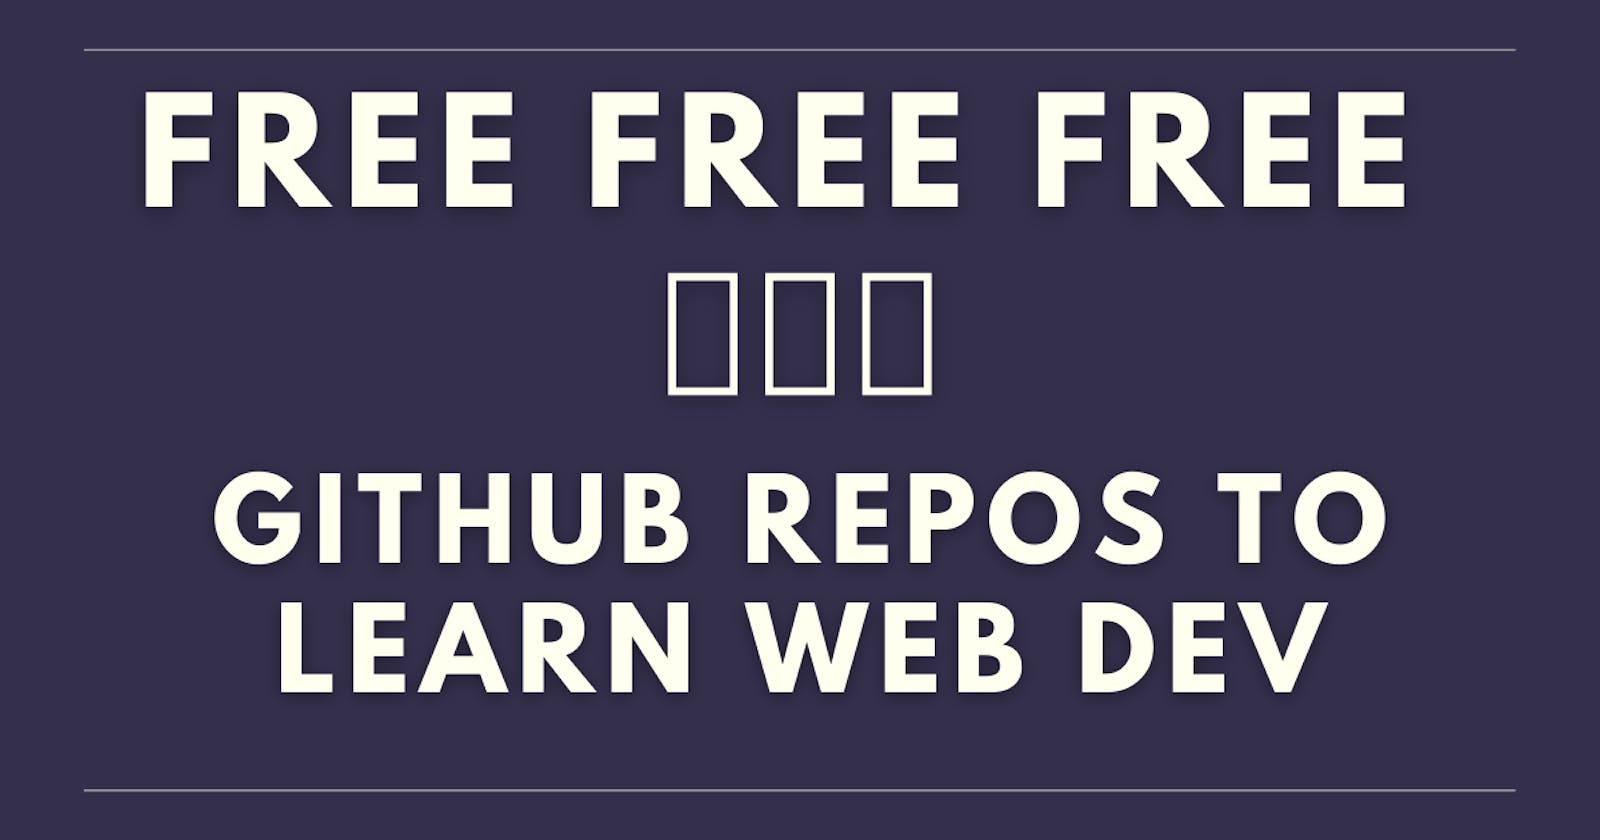 Learn web dev with these free and best GitHub repositories + Bonus